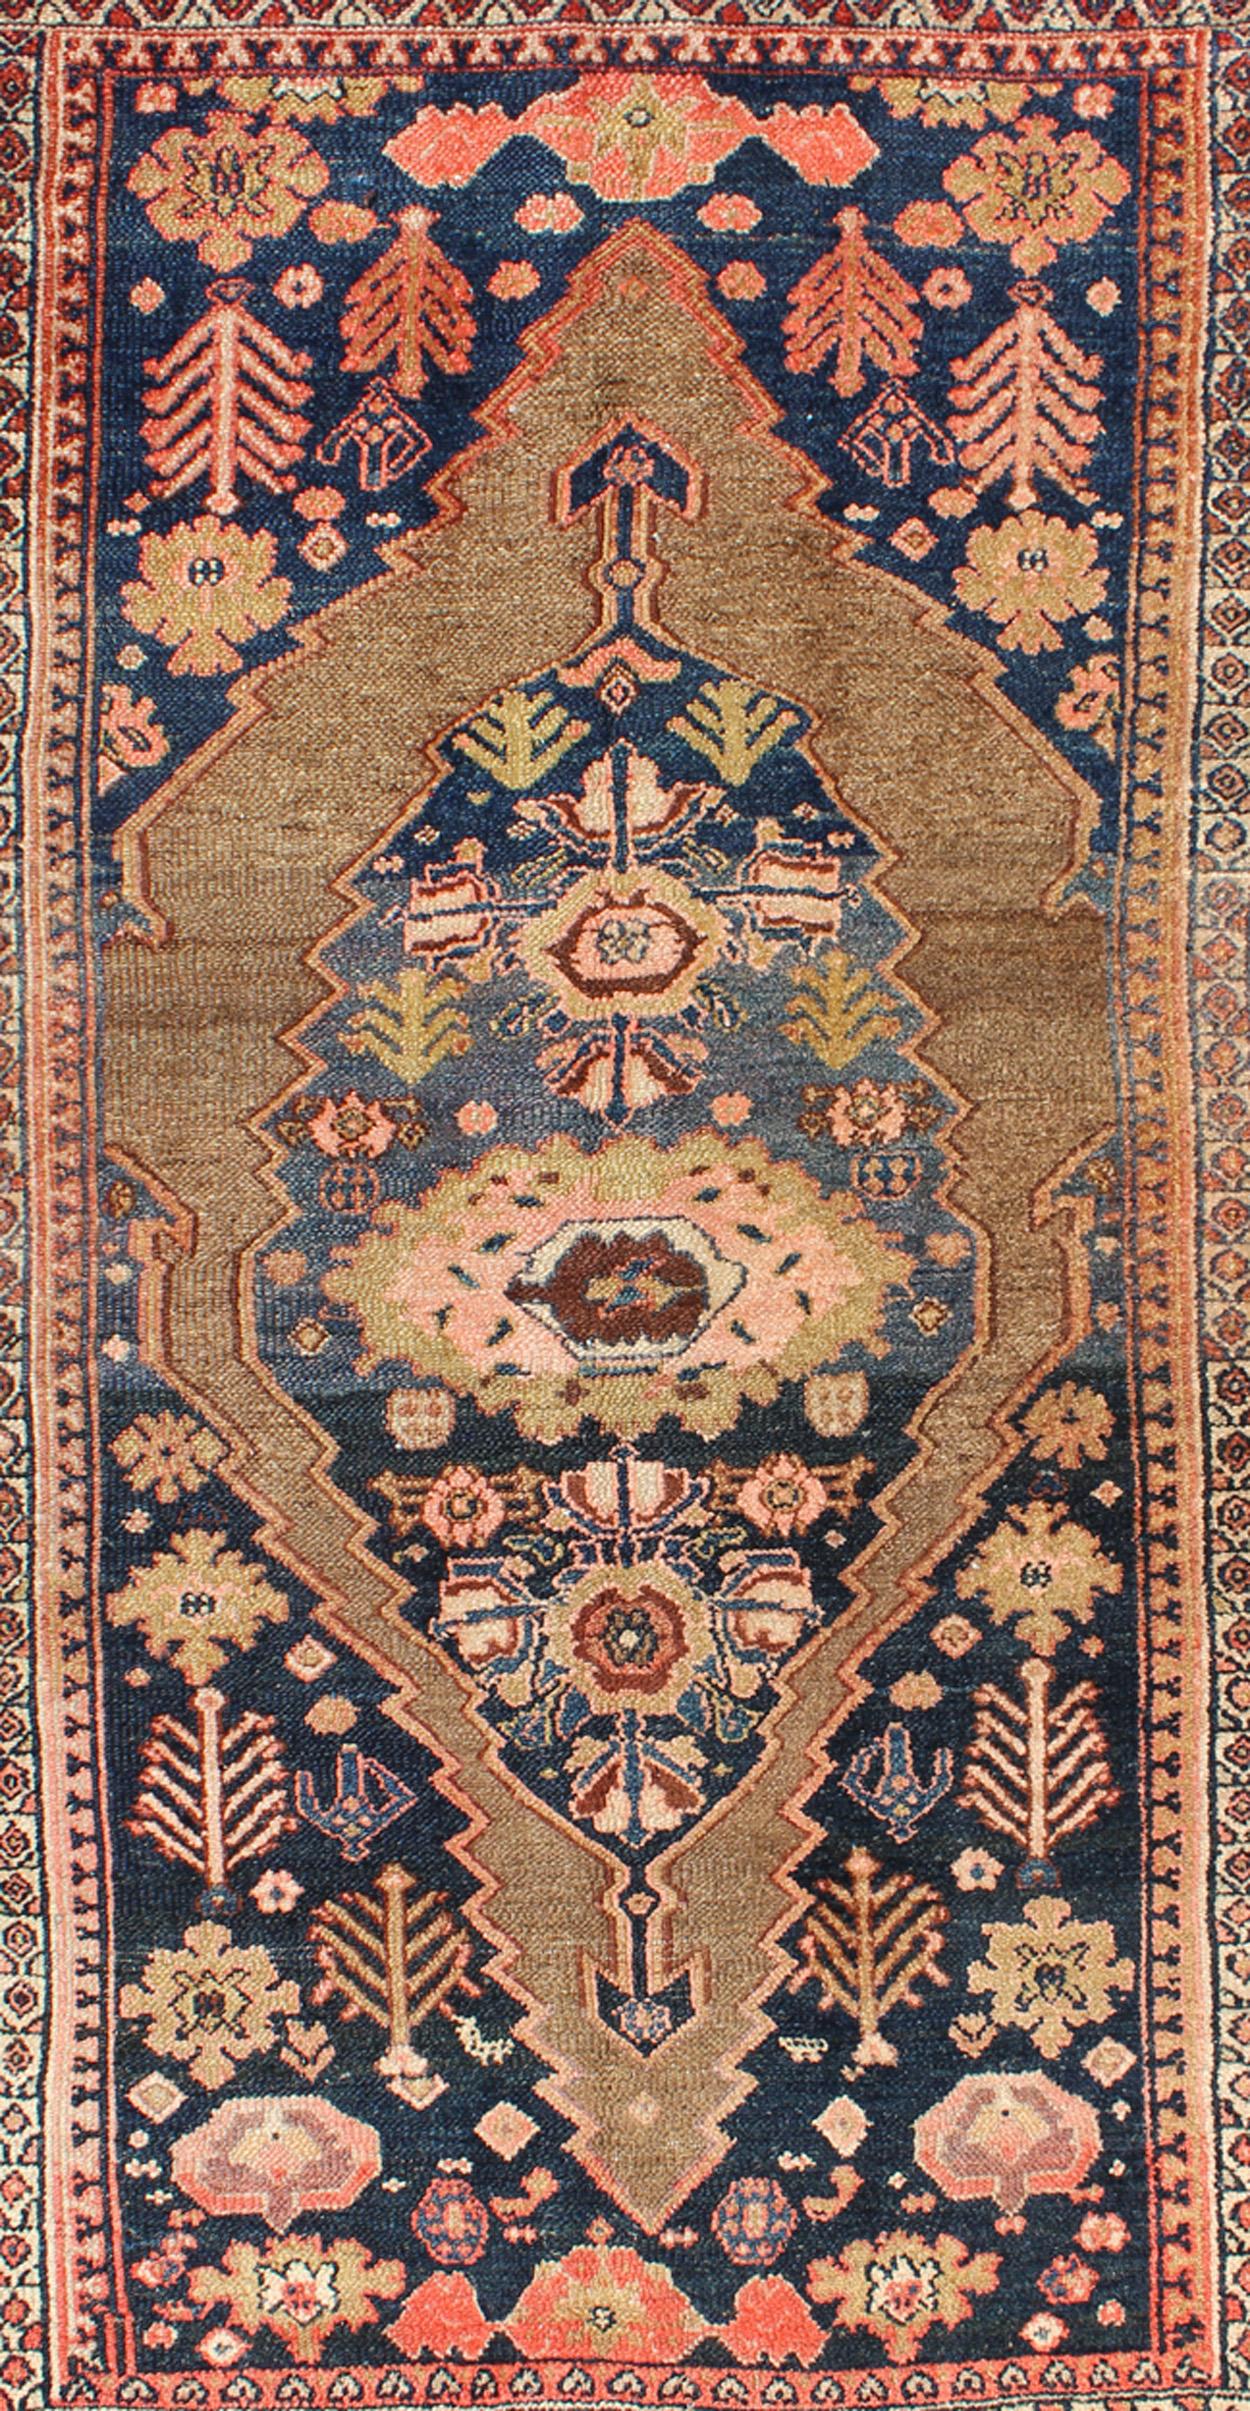 Hand-Knotted Tribal Medallion Design Antique Persian Serab Rug in Camel and Shades of Blue For Sale